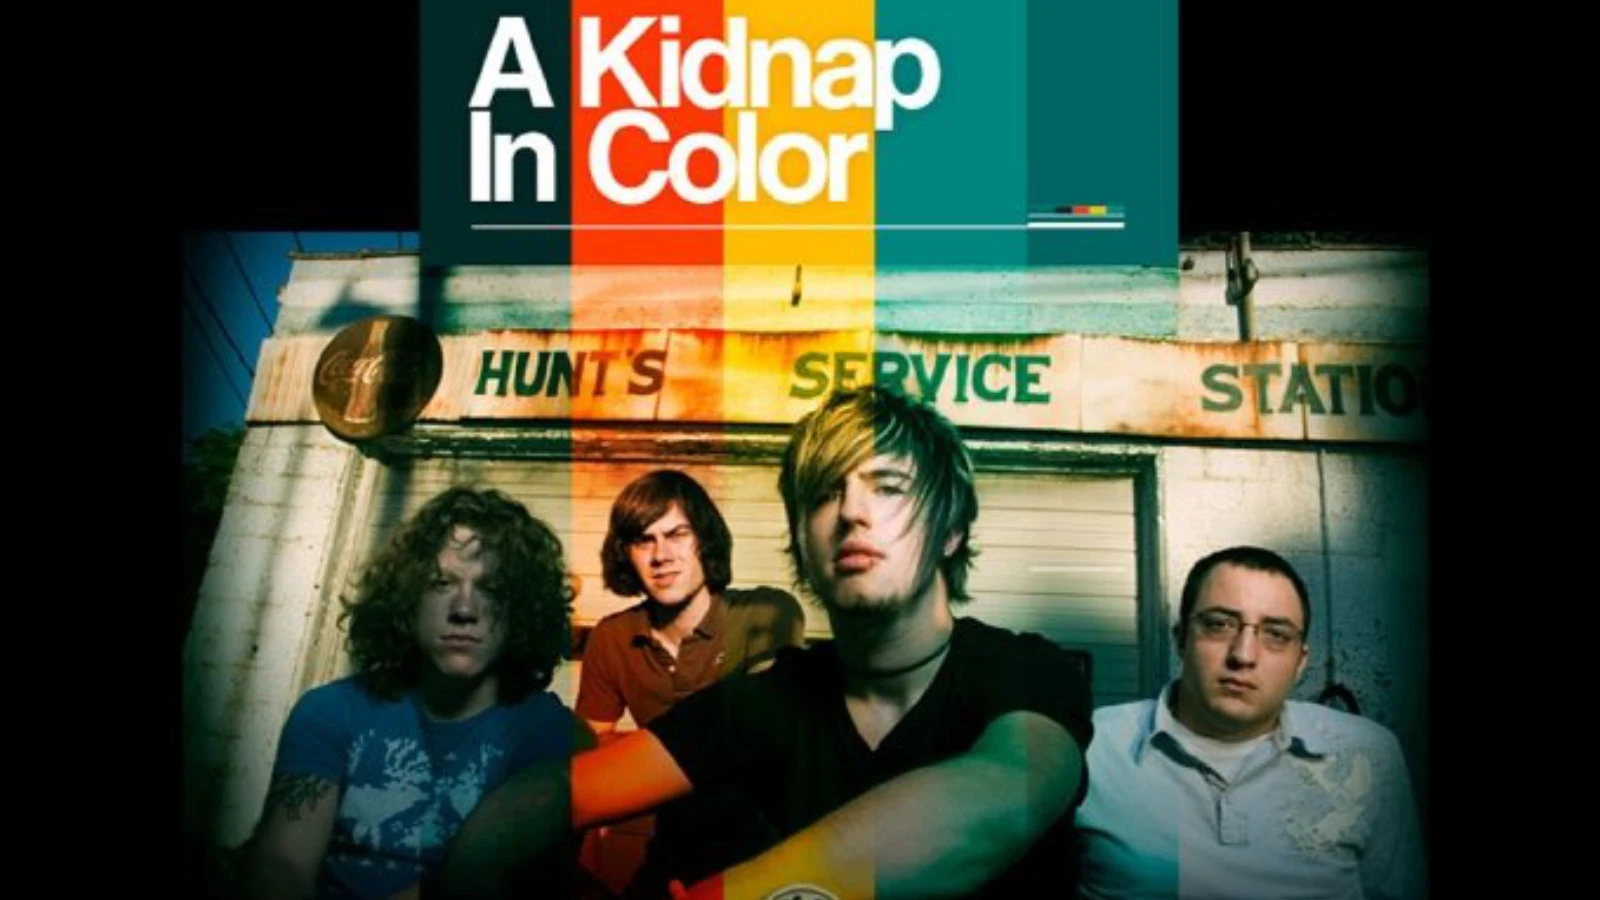 969-a-kidnap-in-color---16x9-17143329351297.jpg